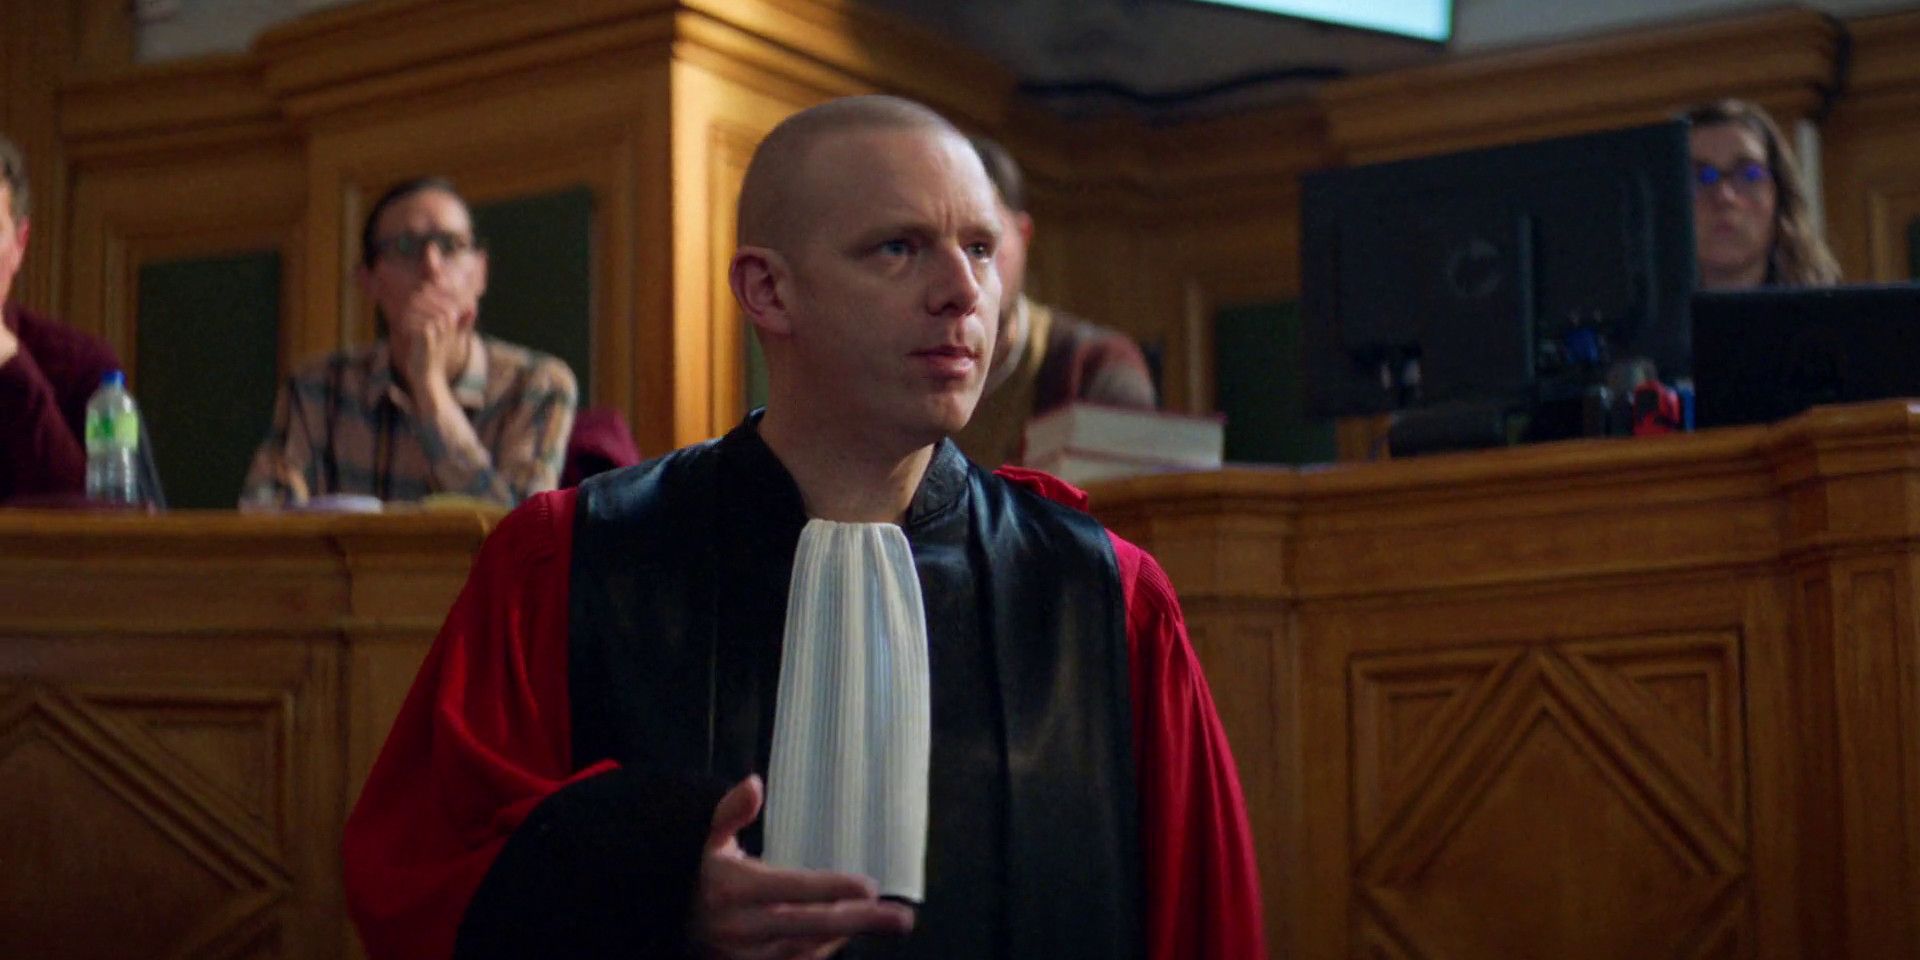 Antoine Reinartz as the prosecutor in court in Anatomy of a Fall.